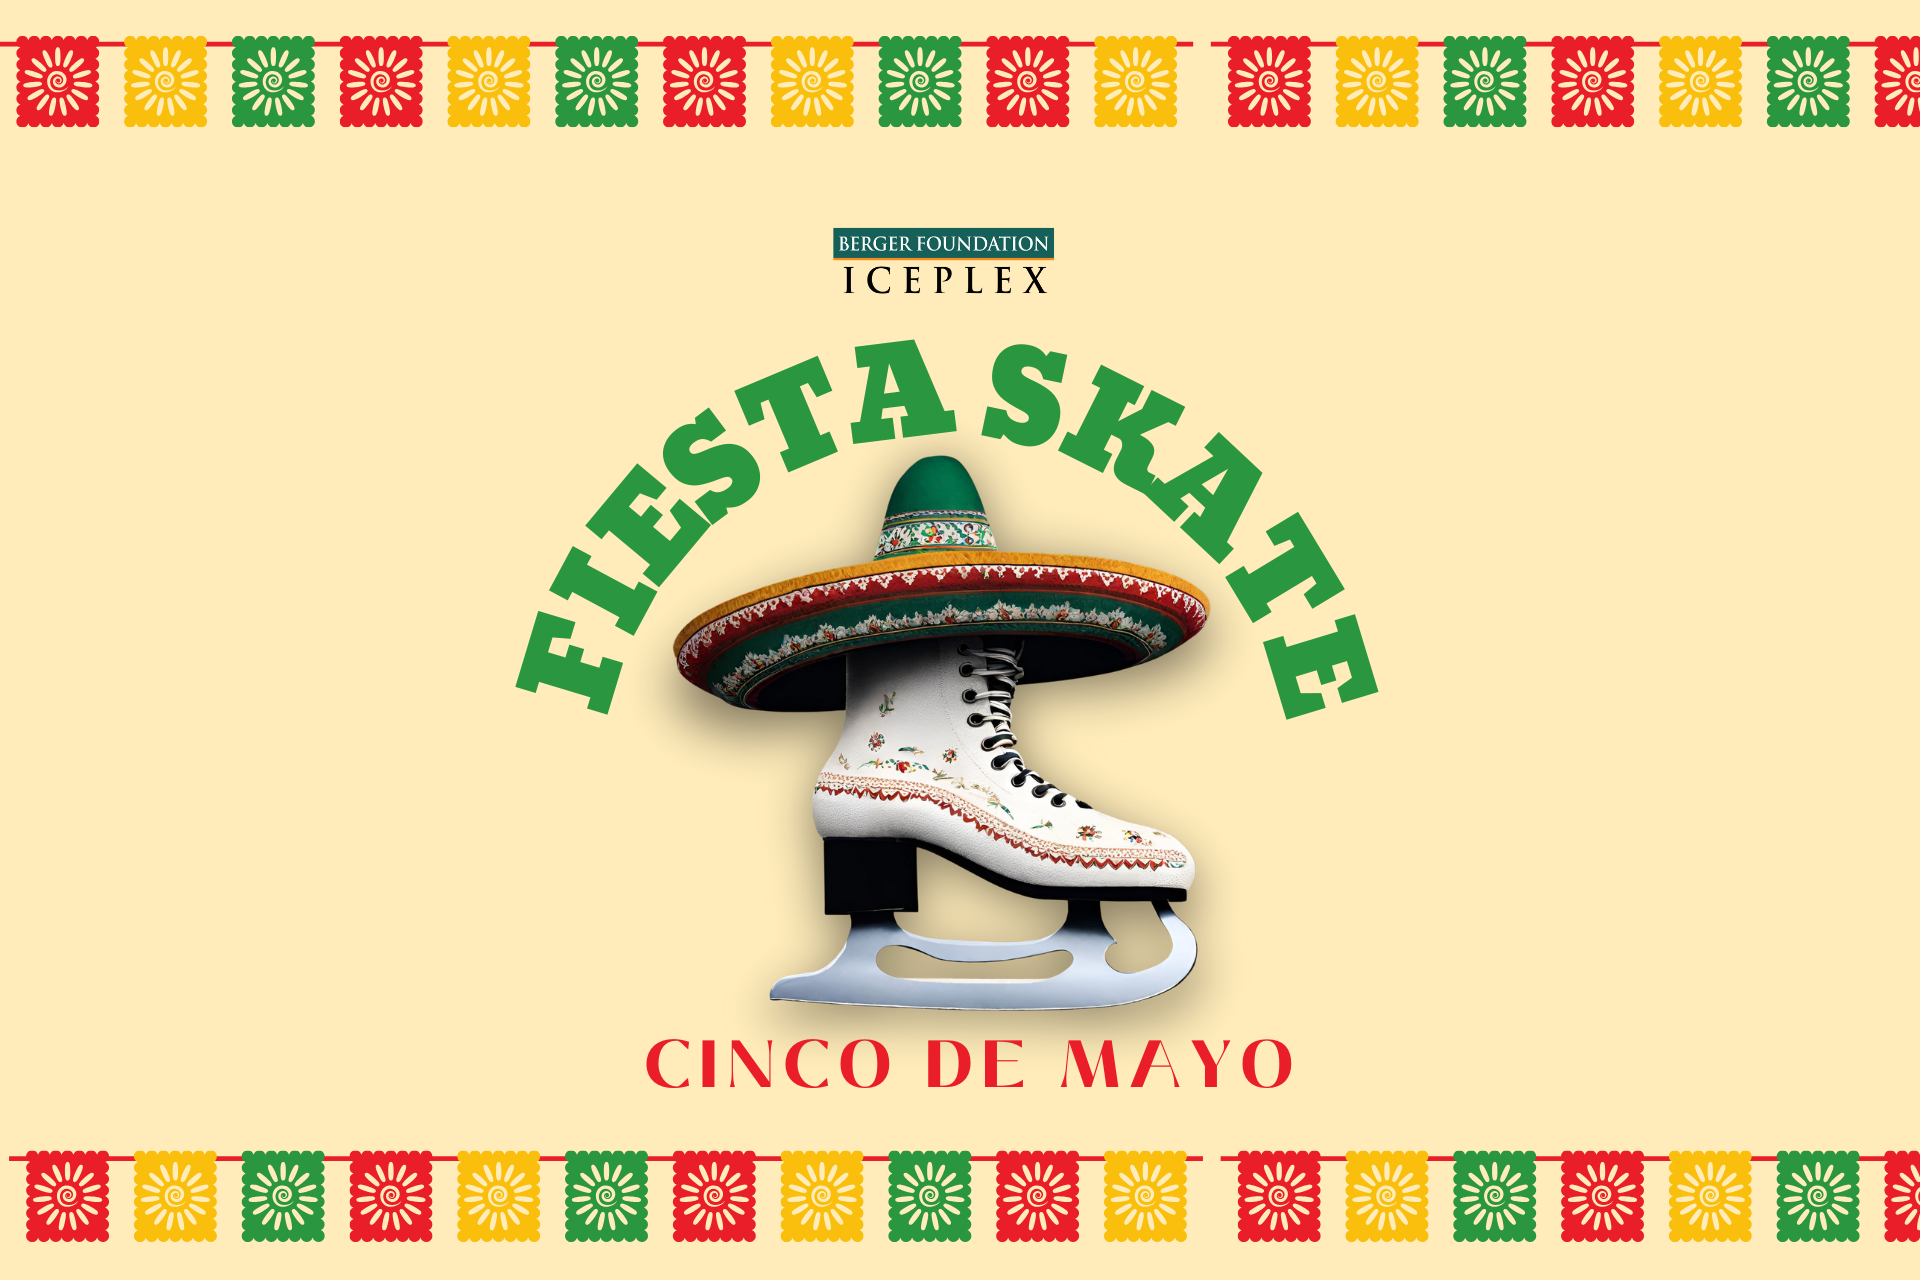 Celebrate Cinco de Mayo in style at our "Fiesta Skate" event, where we blend the excitement of ice skating with the vibrant colors and flavors of Mexican culture.